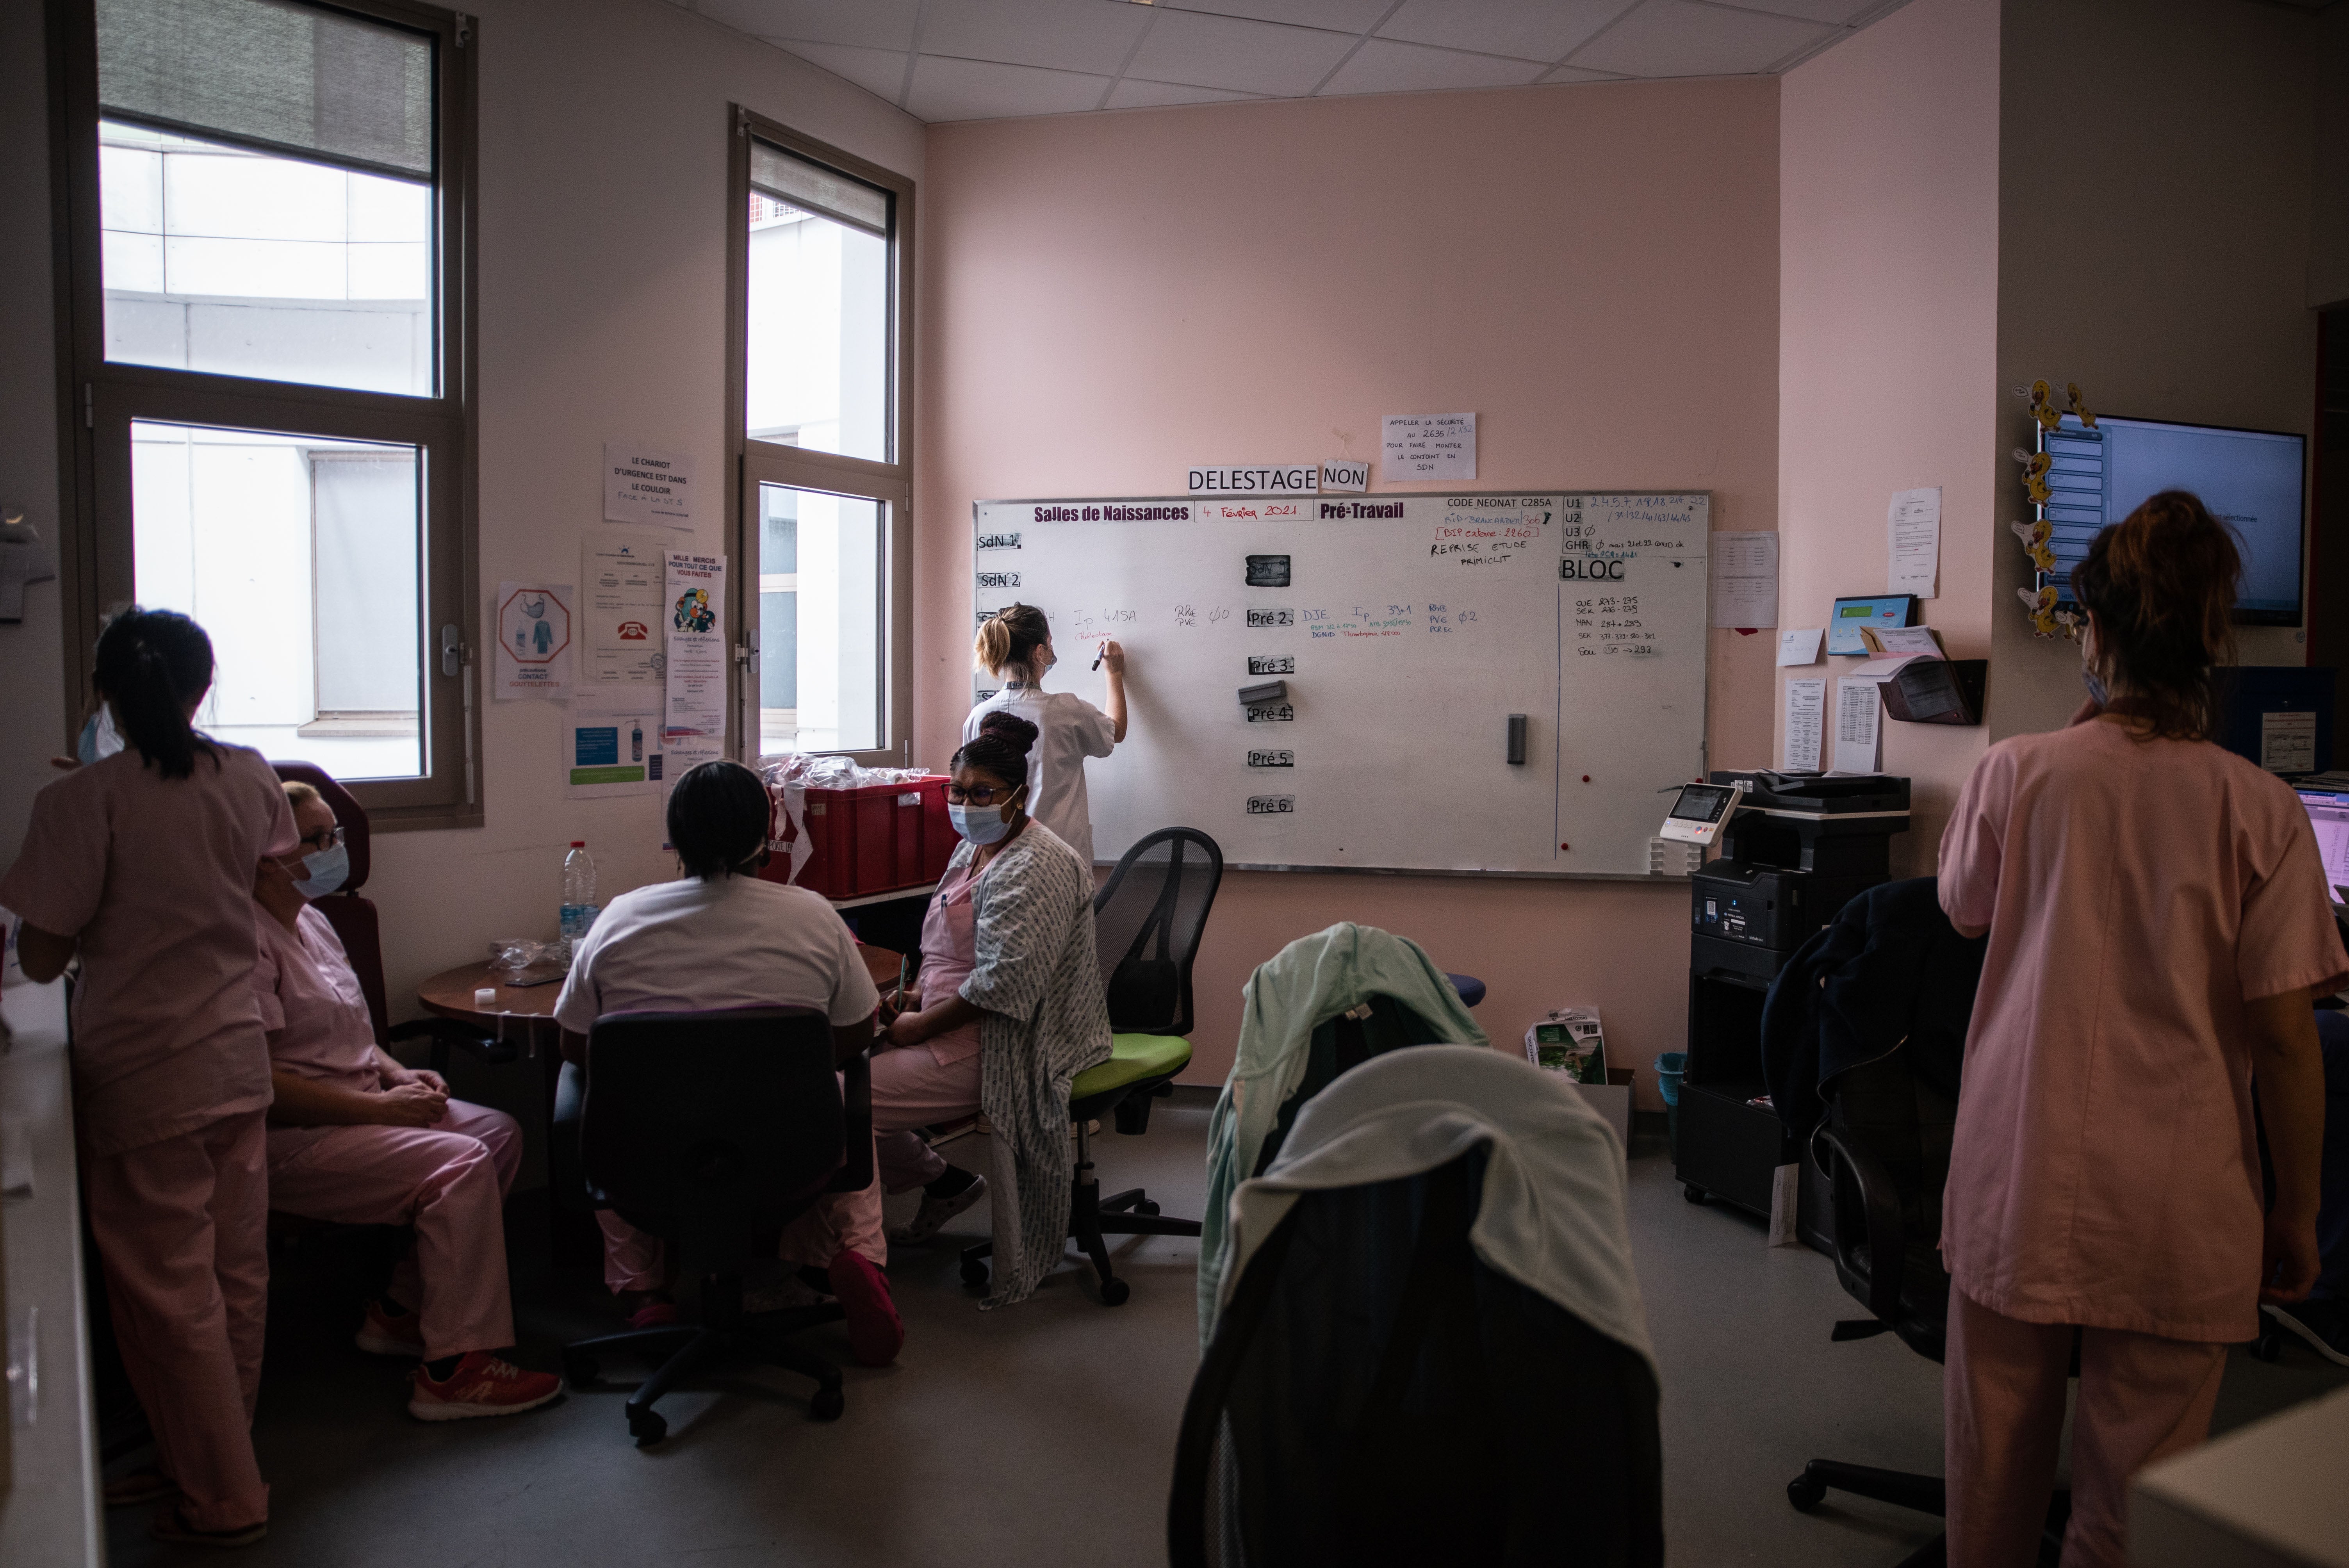 Midwives at a hospital in Saint-Denis, where birth rates have been lower than usual